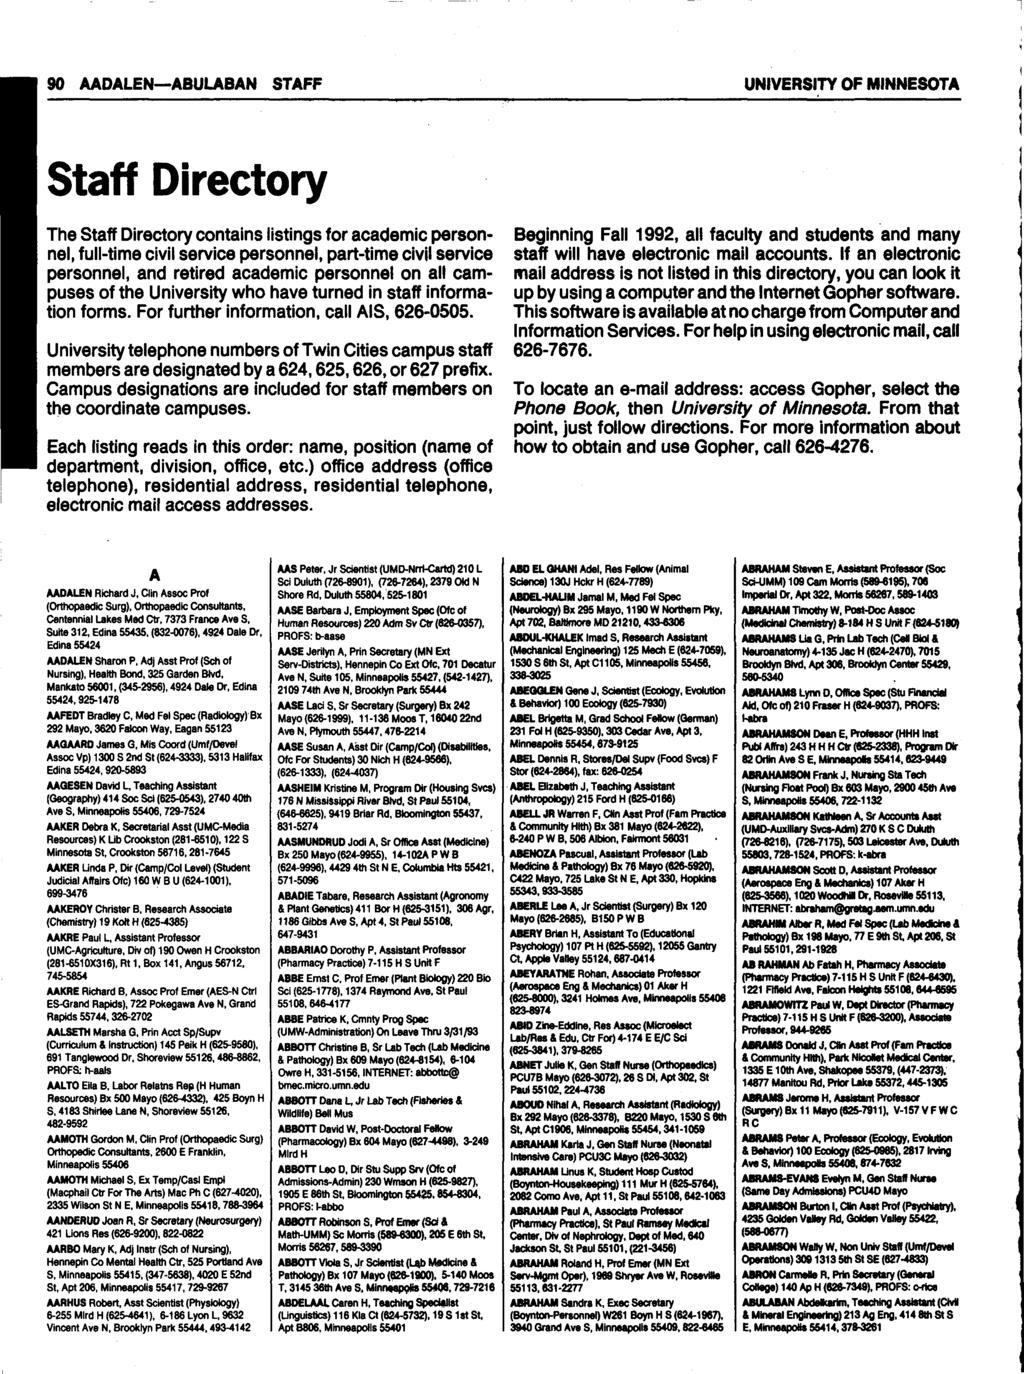 9O AADALEN-ABULABAN STAFF UNIVERSITY OF MINNESOTA Staff Directory The Staff Directory contains listings for academic personnel, full-time civil service personnel, part-time civil service personnel,